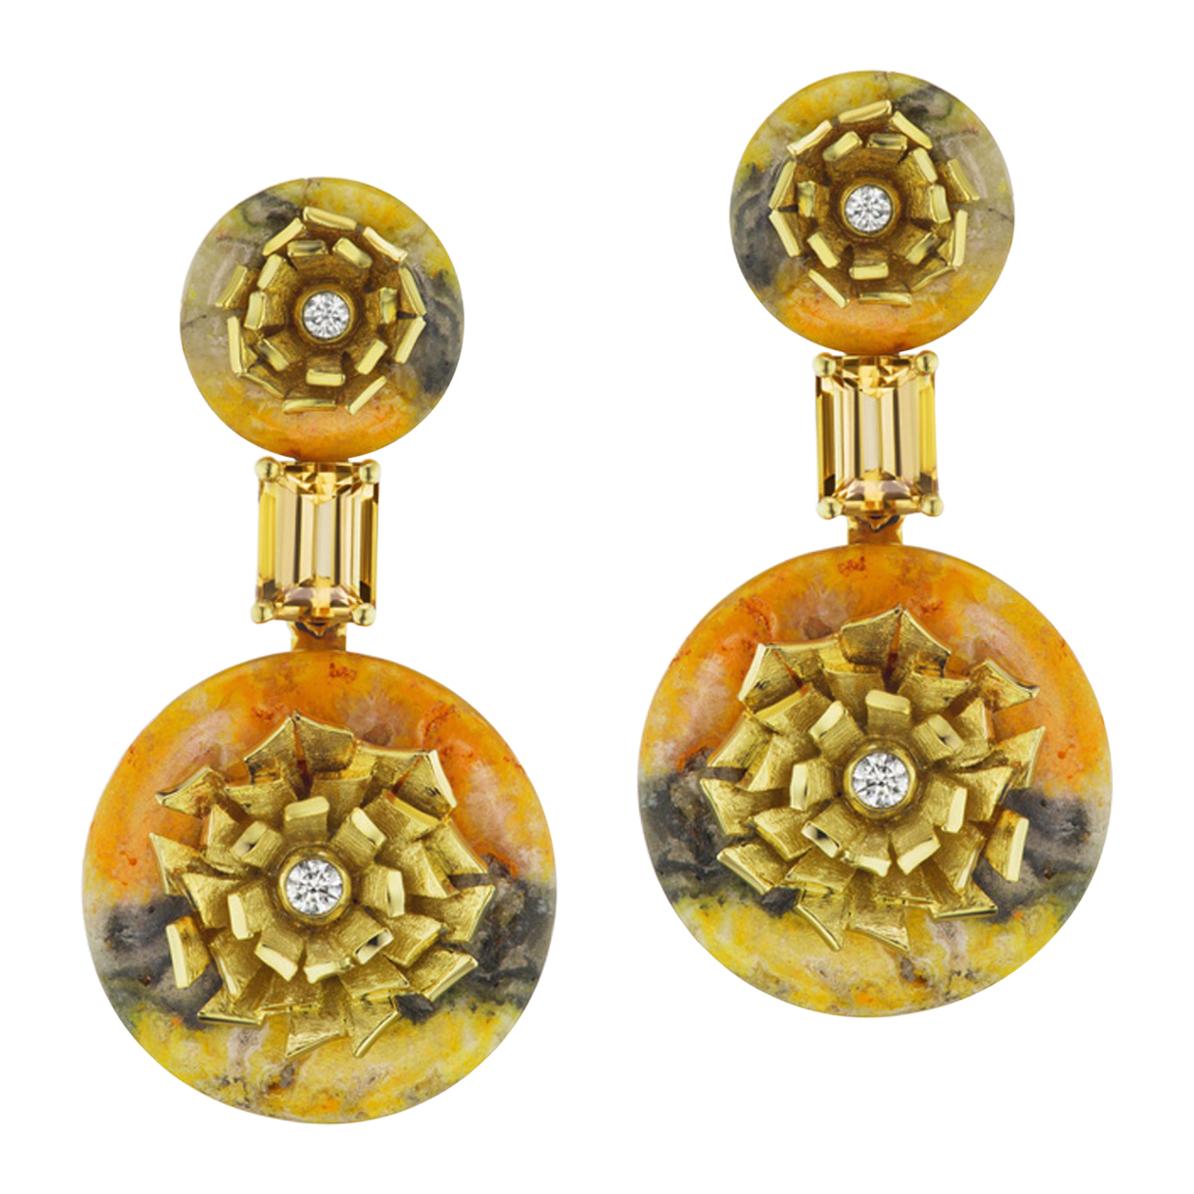 Bumble Bee Jasper and Imperial Topaz “Donut” Series Earrings by Andrew Glassford